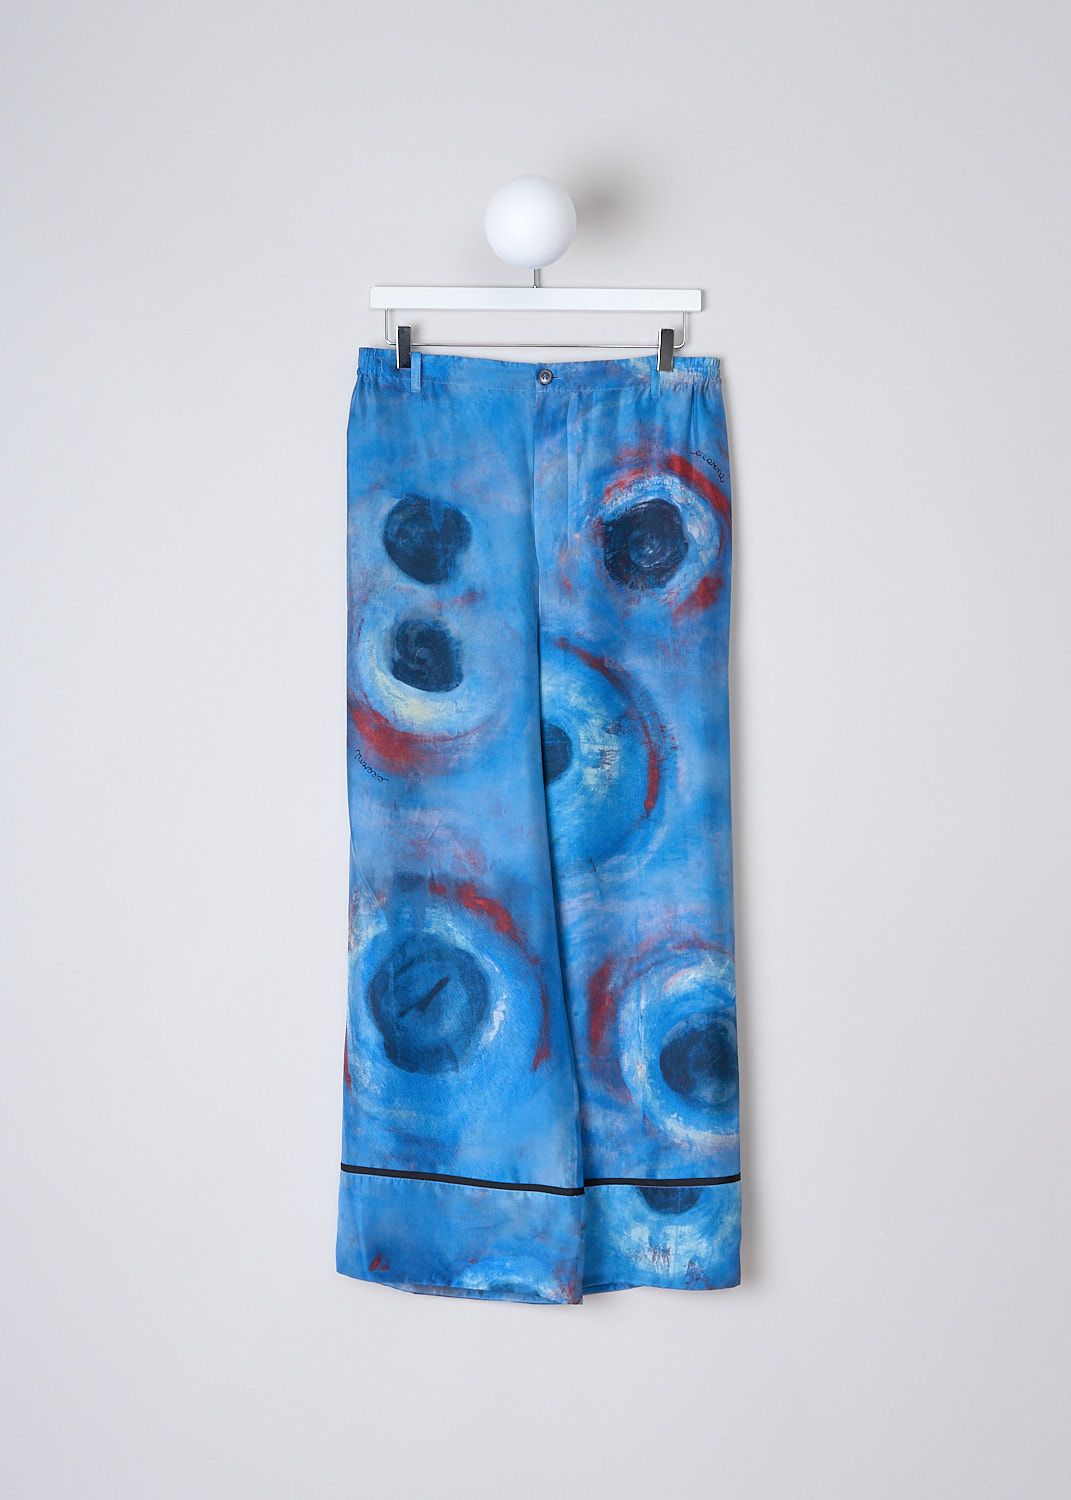 MARNI, COBALT BLUE SILK PANTS, PAMA0335I0_UTSF97_BBB44, Blue, Red, Print, Front, These high-waisted silk 'Buchi Blu' pants have an abstract print with painterly red and blue splotches throughout. These pants have a partly elasticated waistband with belt loop and a front button and zip closure. In the front, the pants have forward slanted pockets. The wide pant legs have a broad hem. In the back, these pants have a single buttoned patch pocket.
  
